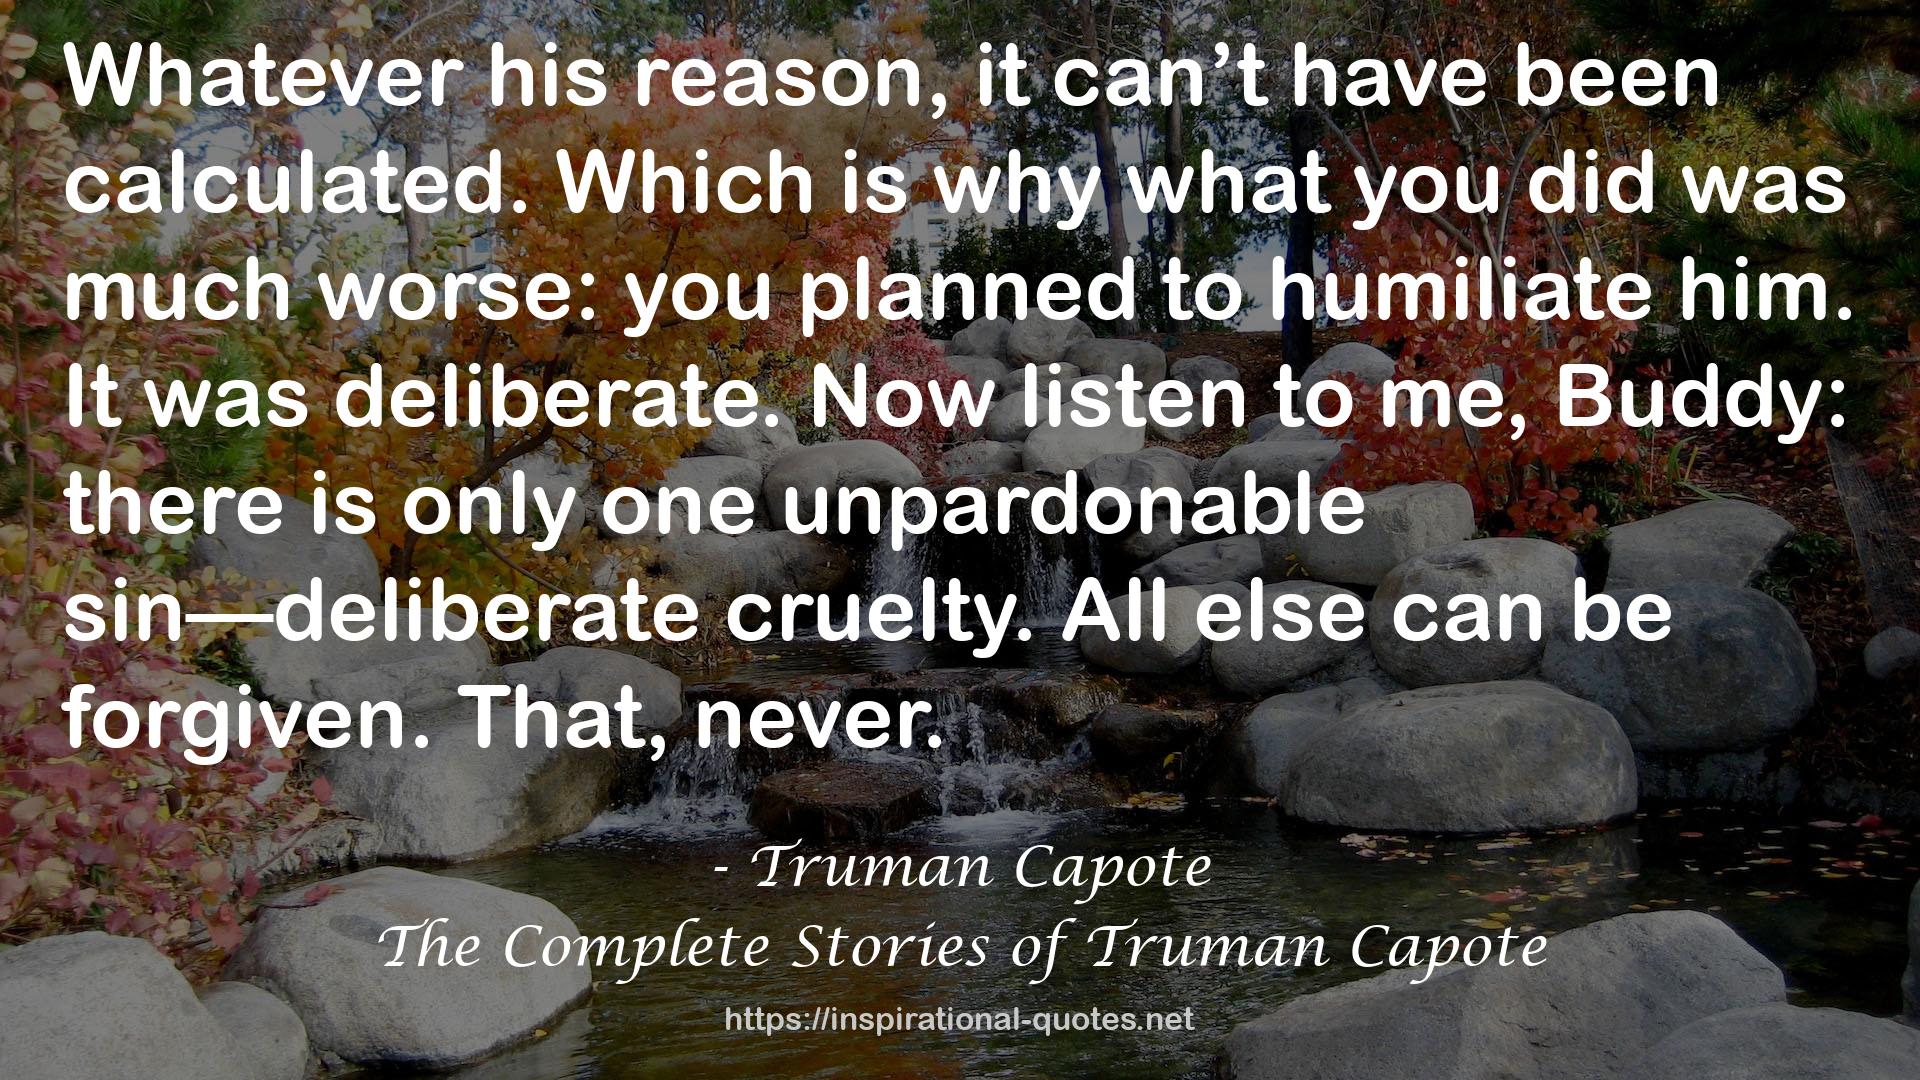 The Complete Stories of Truman Capote QUOTES